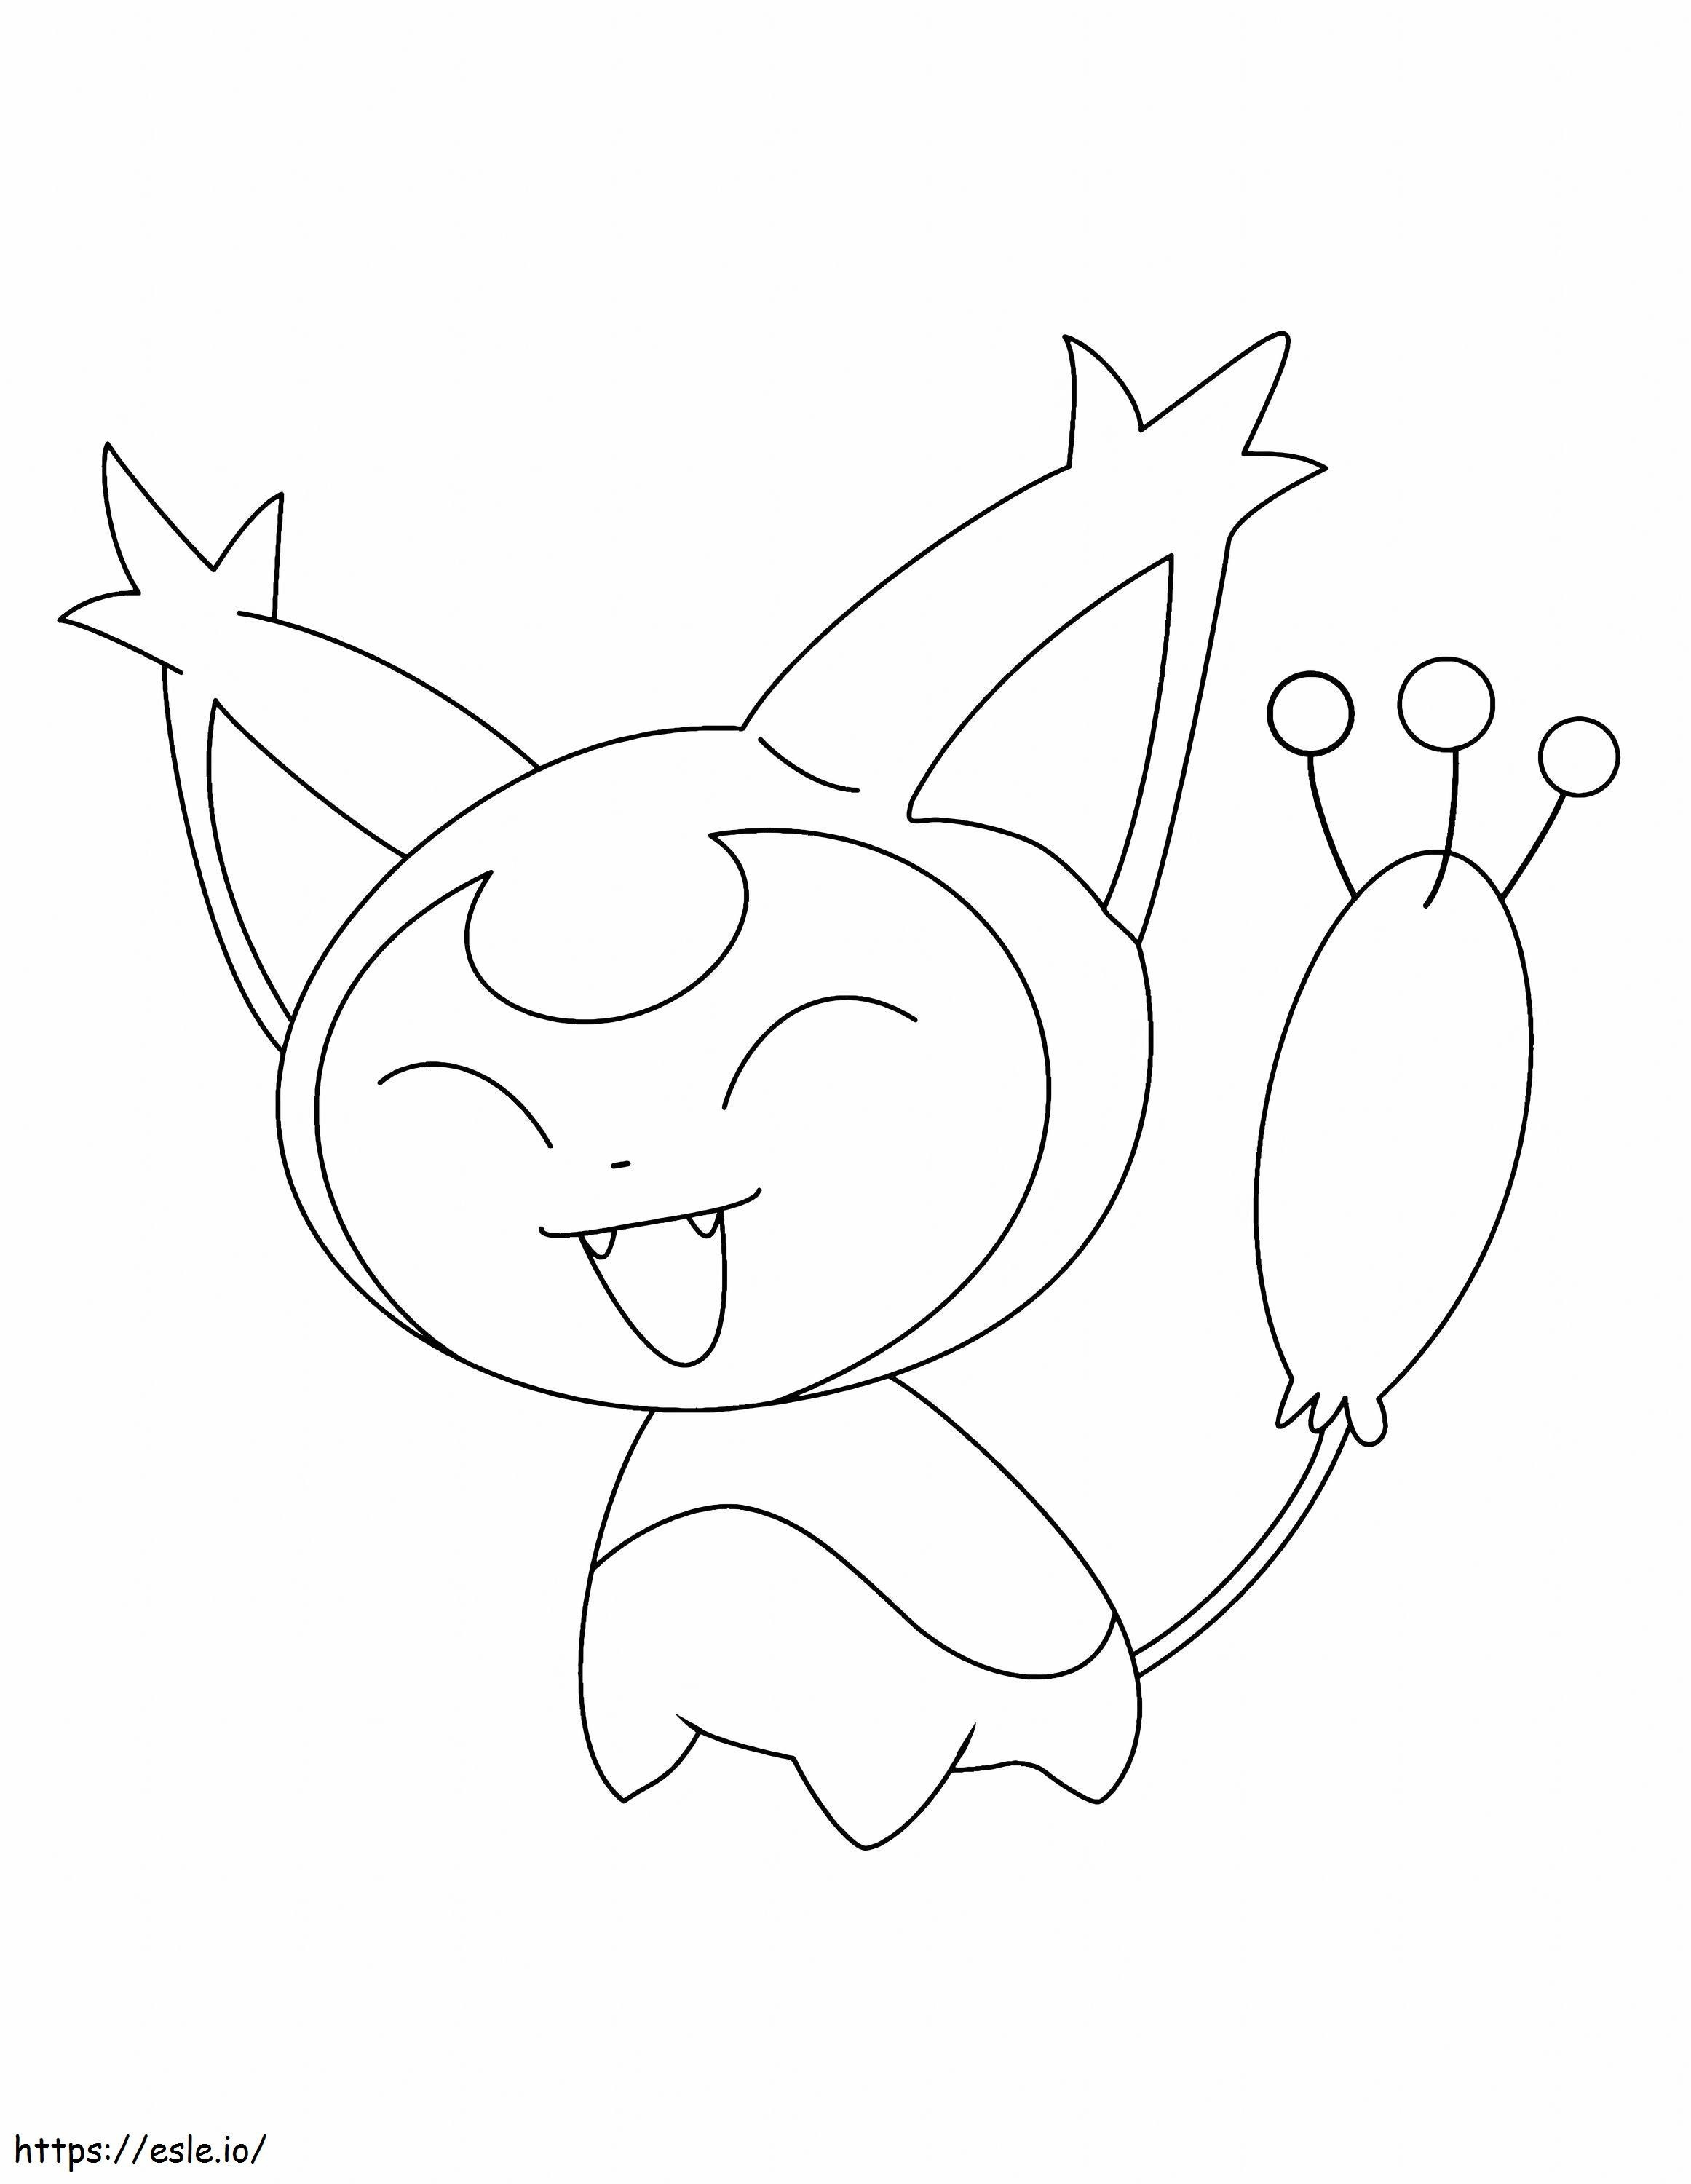 Skitty coloring page